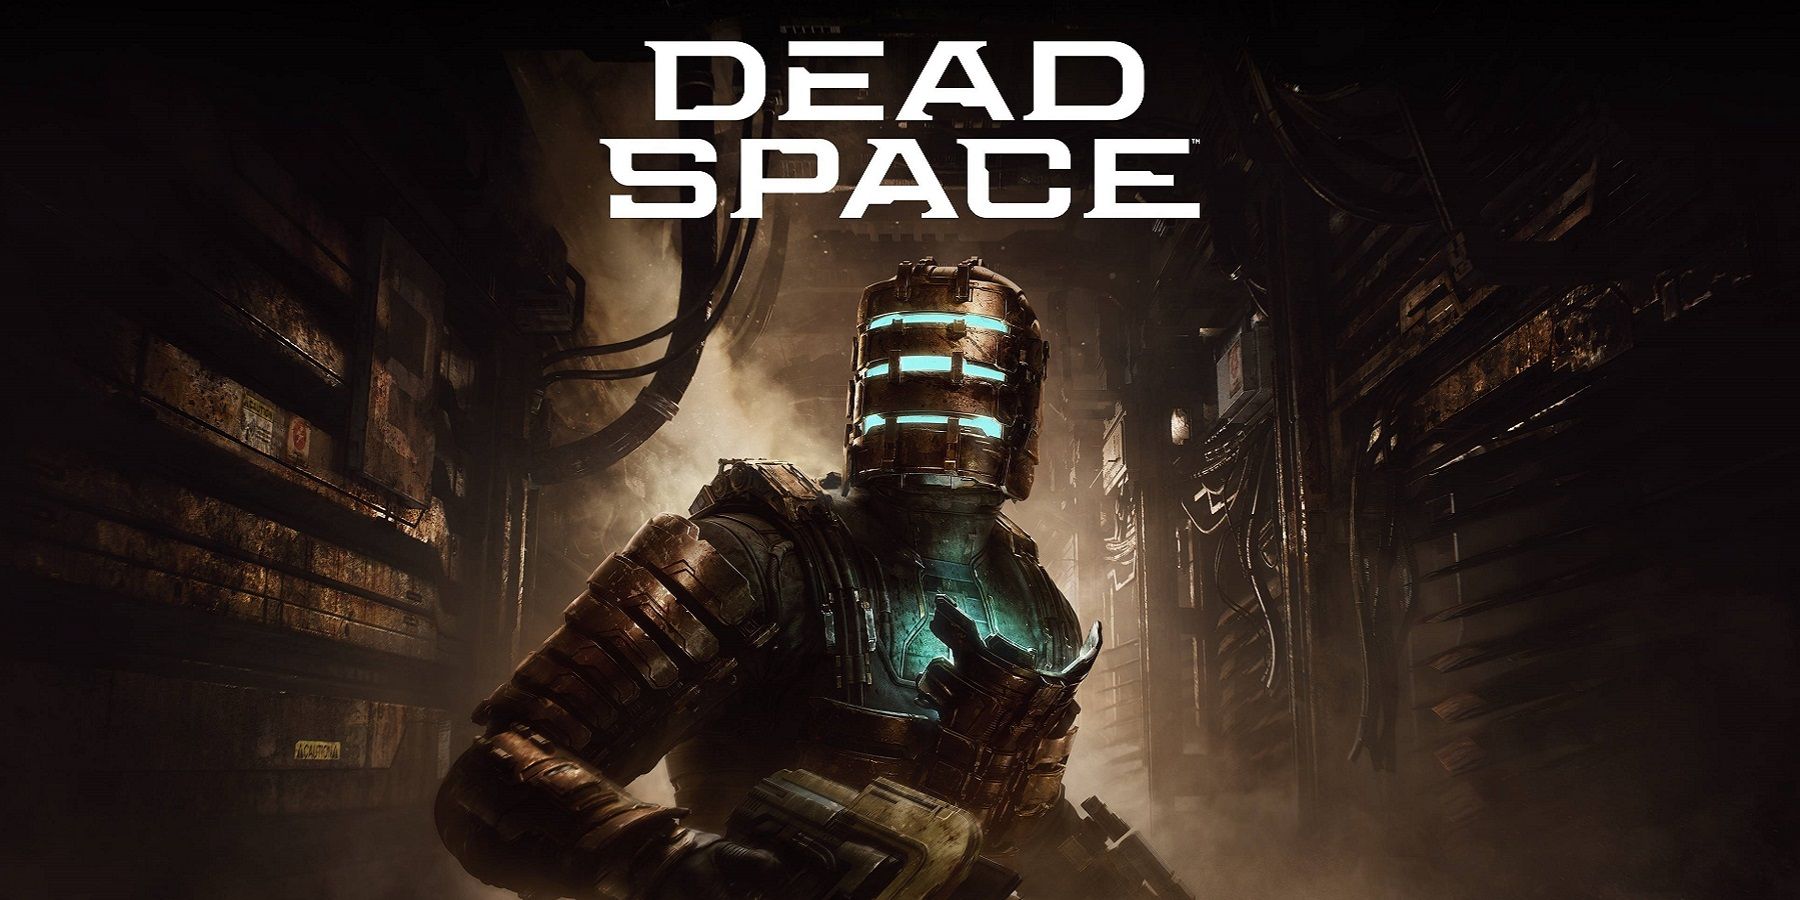 Image from the Dead Space remake showing Isaac Clarke under the game's logo.